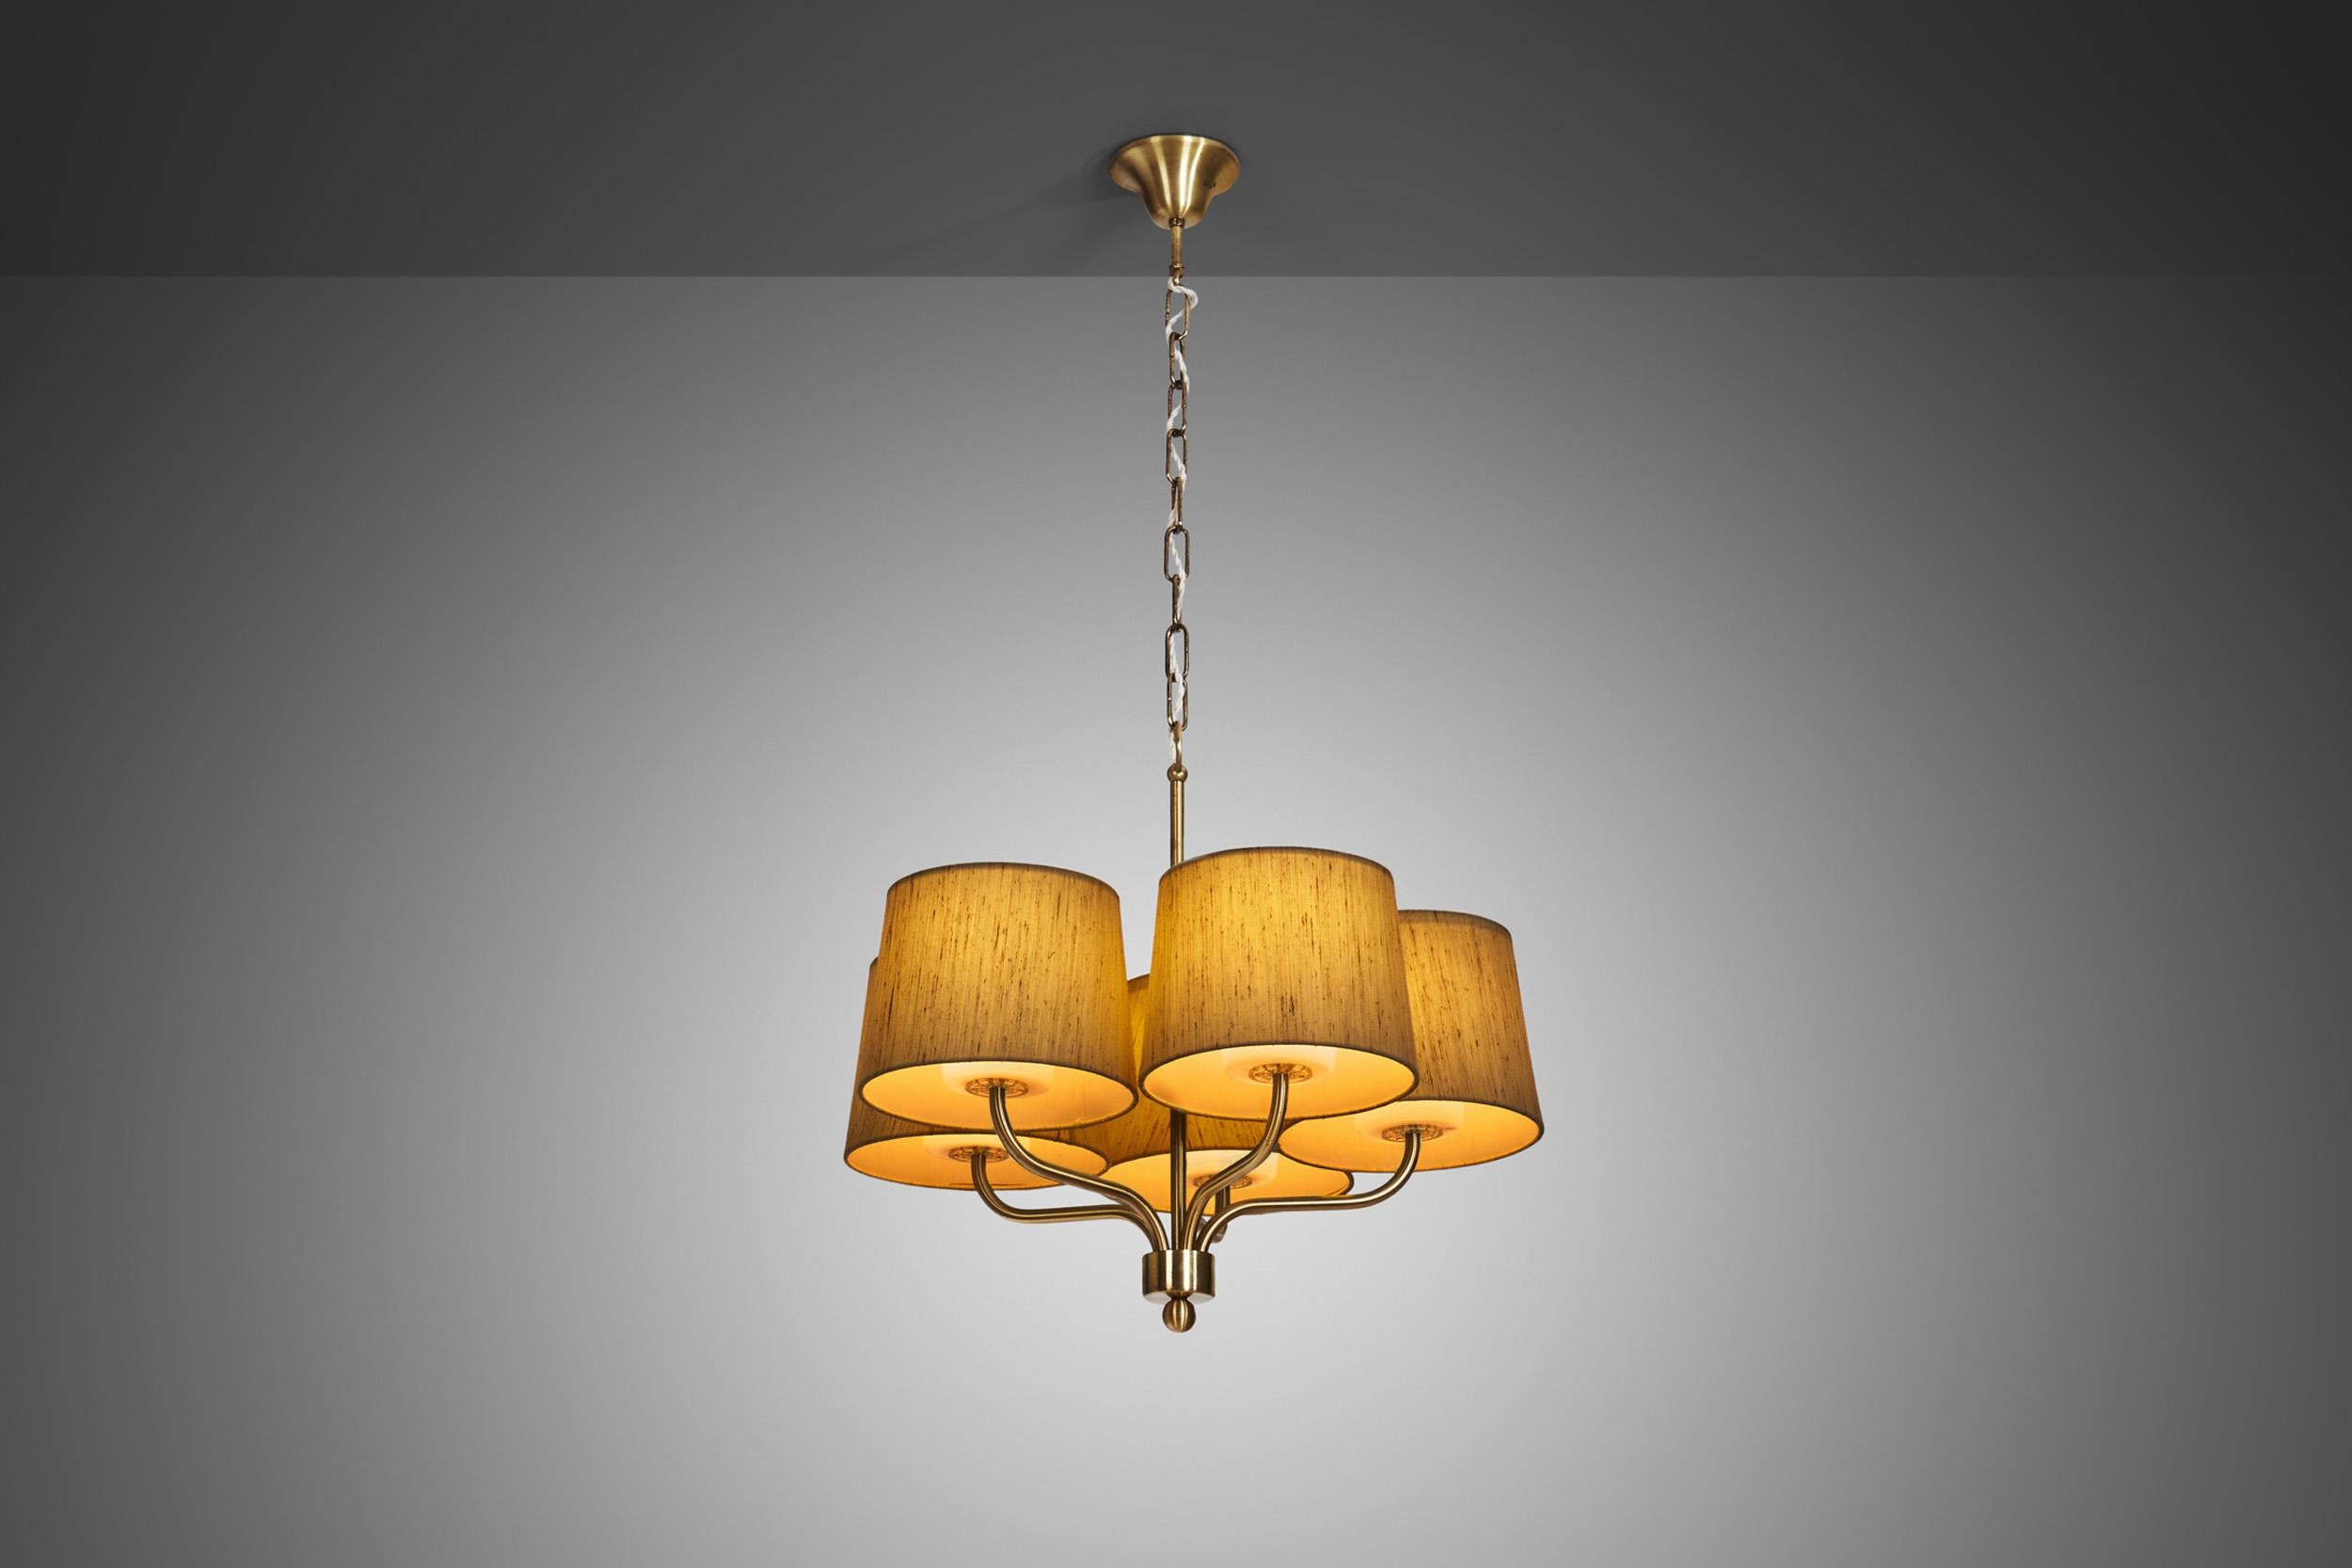 Five Arm Brass Ceiling Lamp with Fabric Shades by Luxus Vittsjö, Sweden 1960s For Sale 2